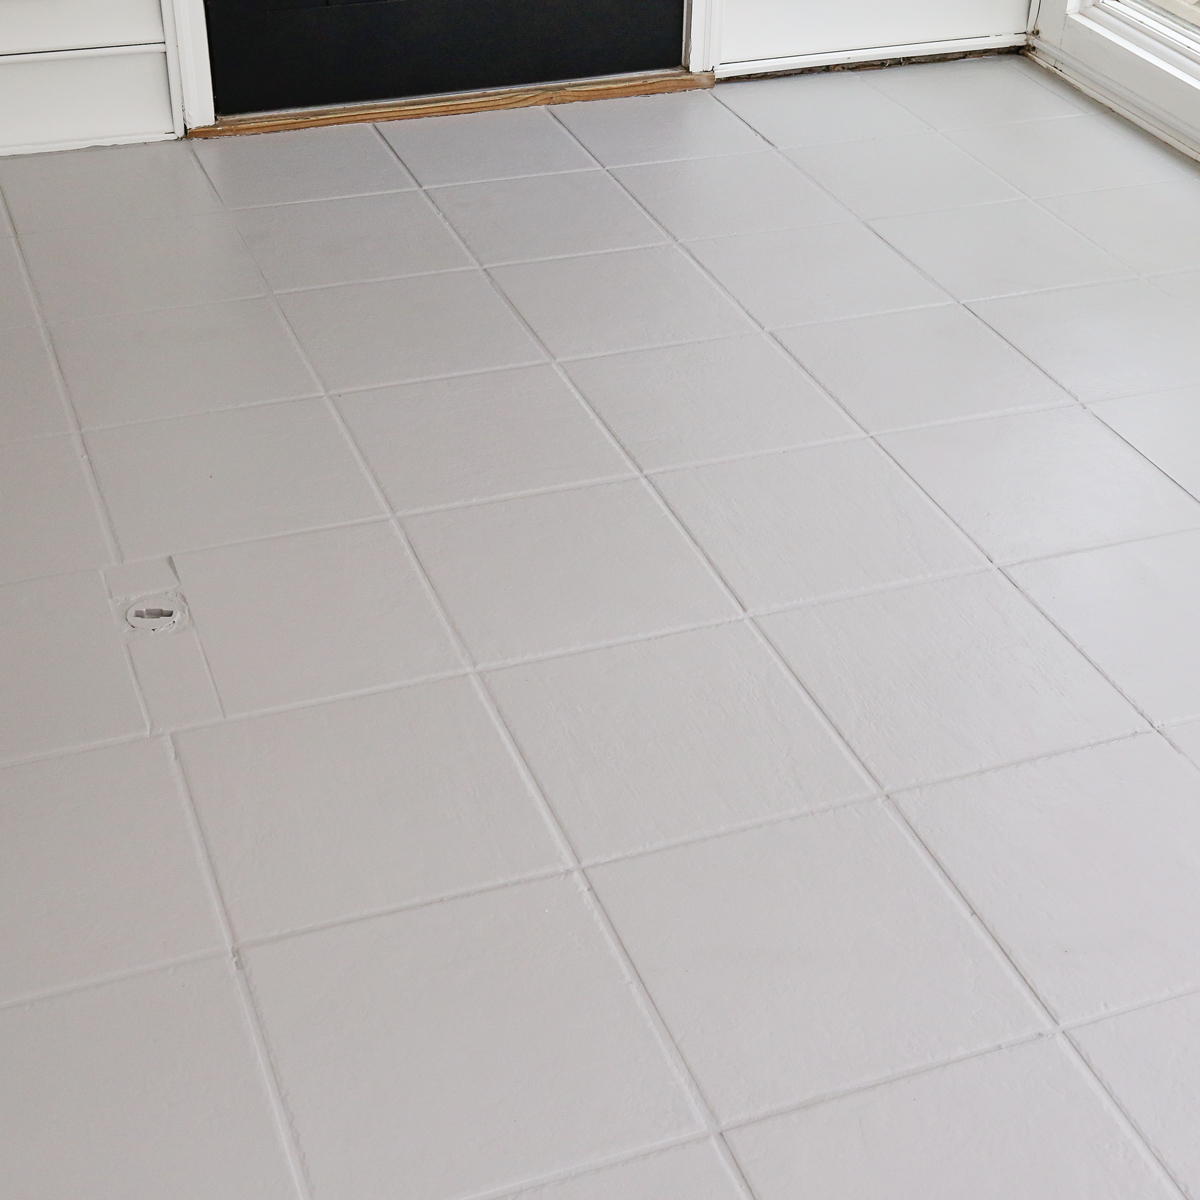 How To Paint Tile Floor Angela Marie Made, How To Change Floor Tile Color Without Replacing